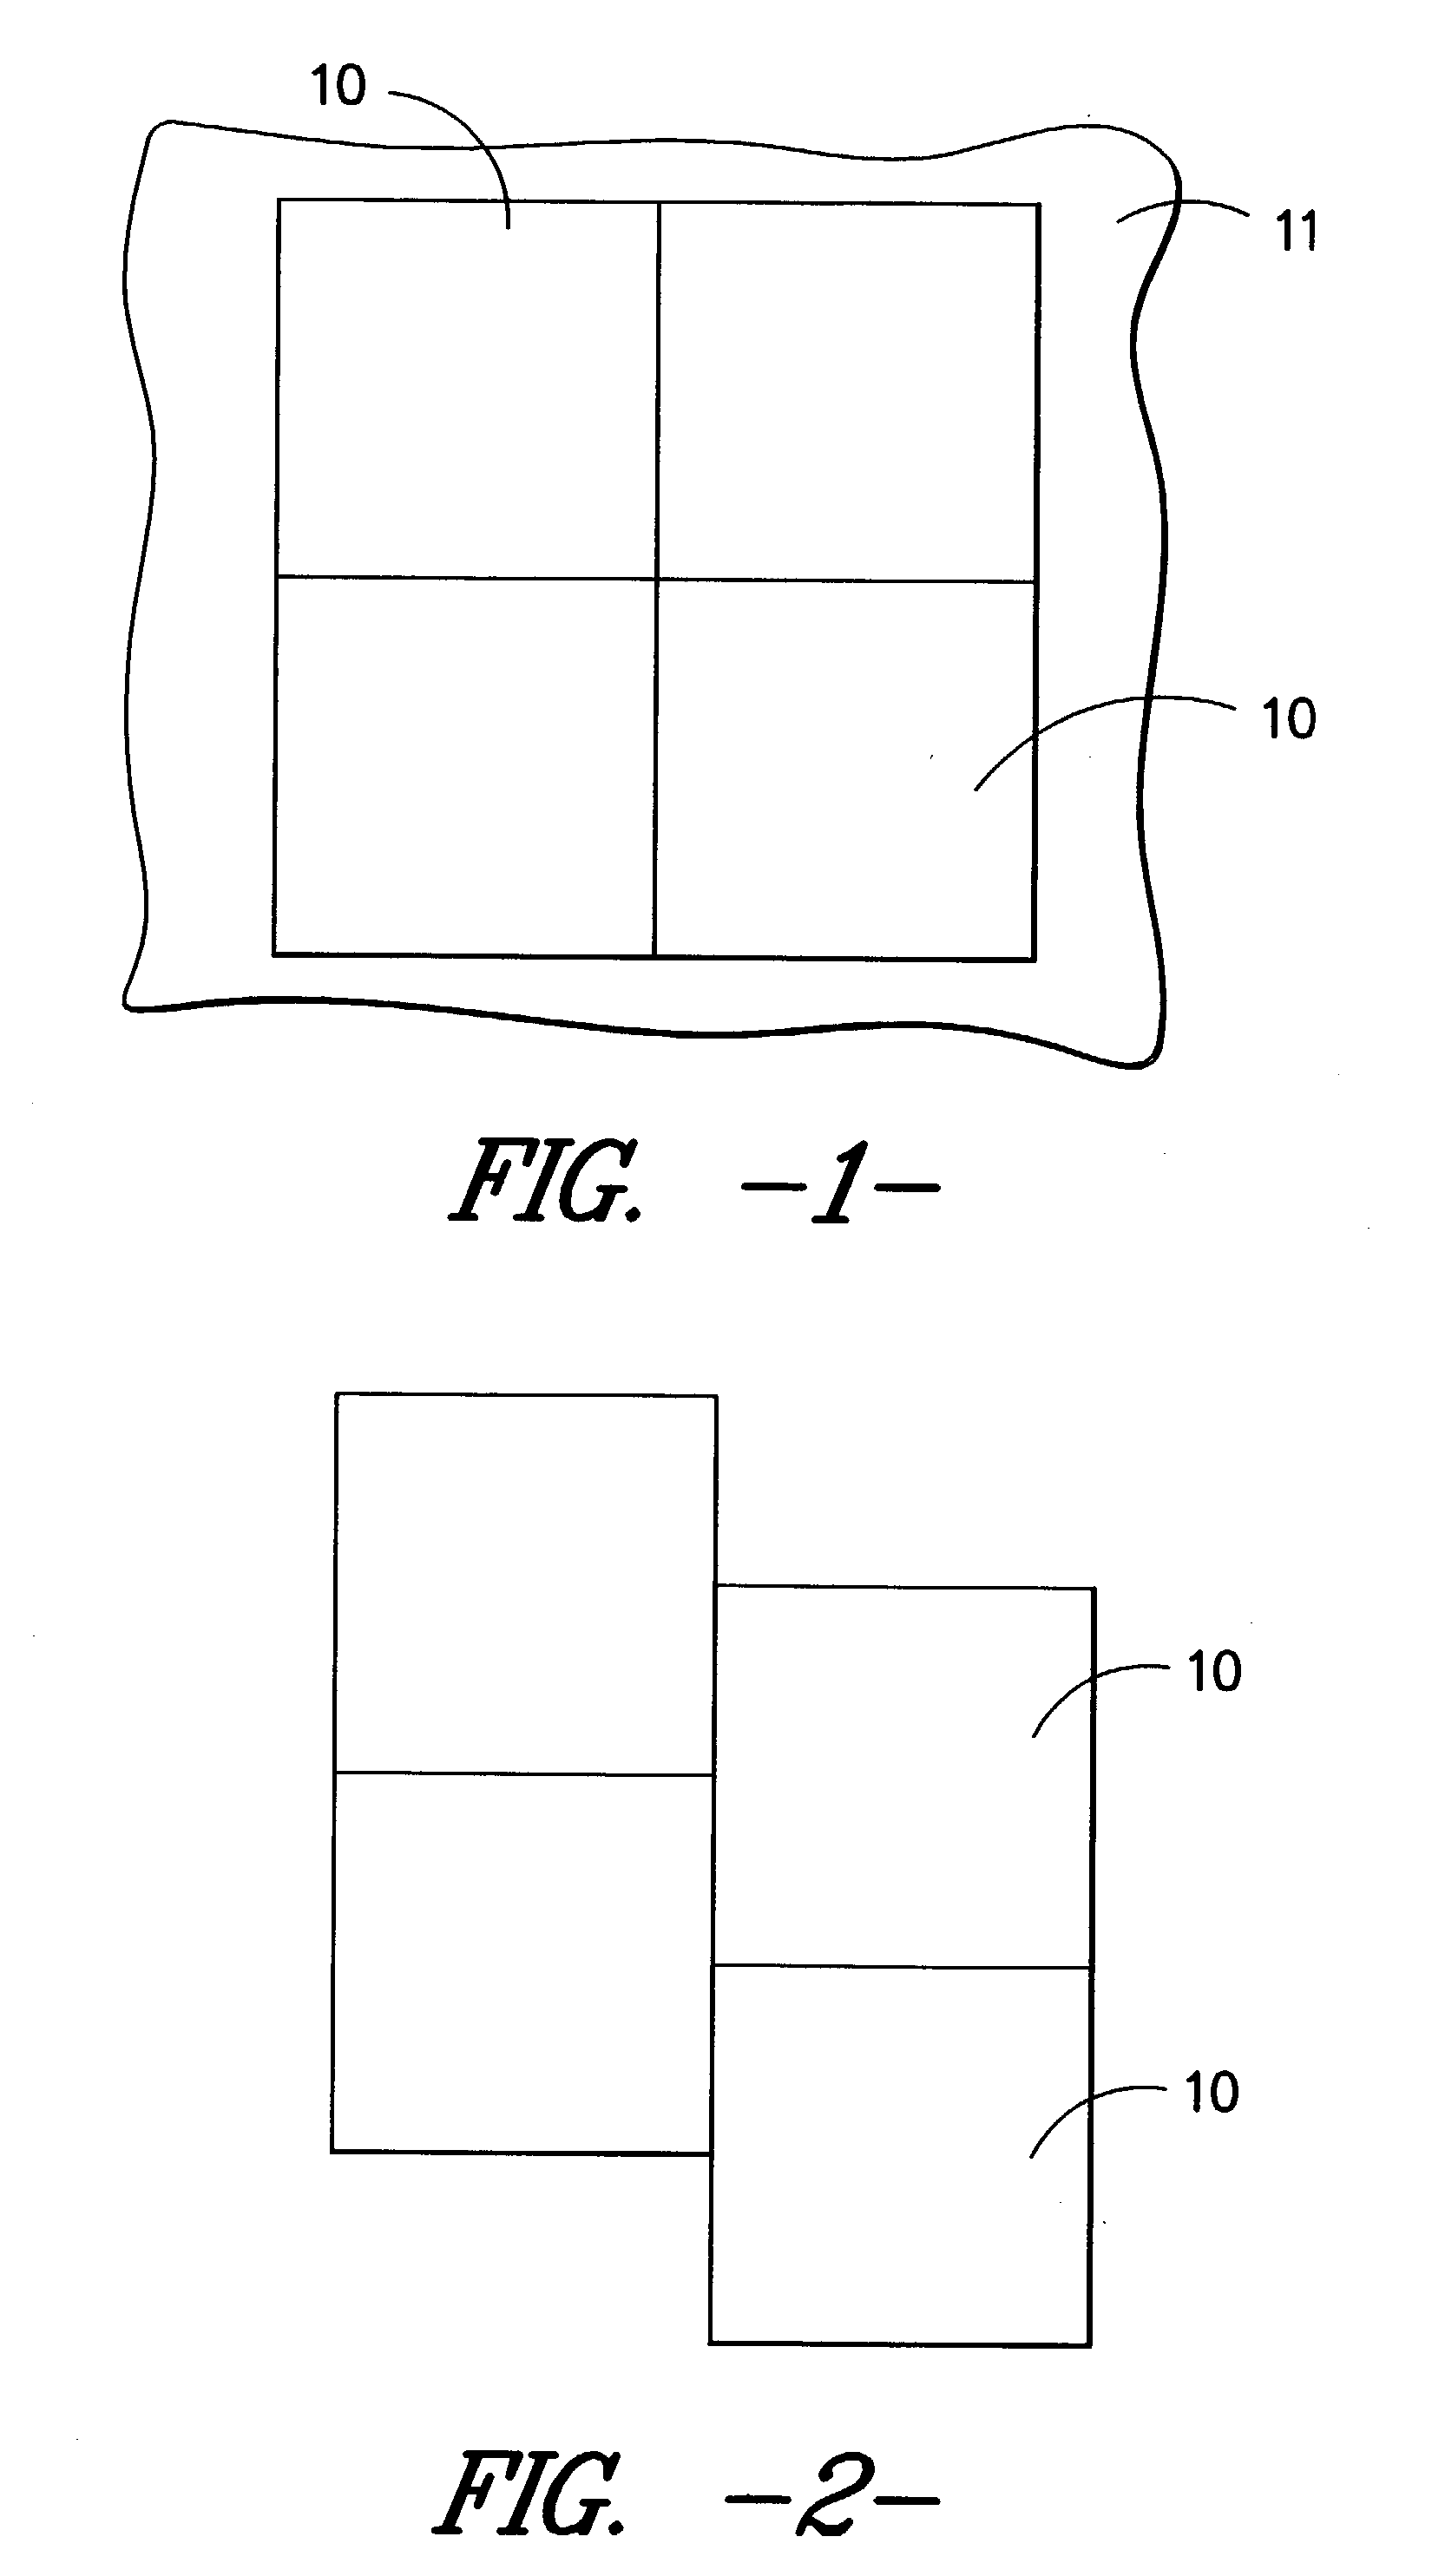 Flooring systems and methods